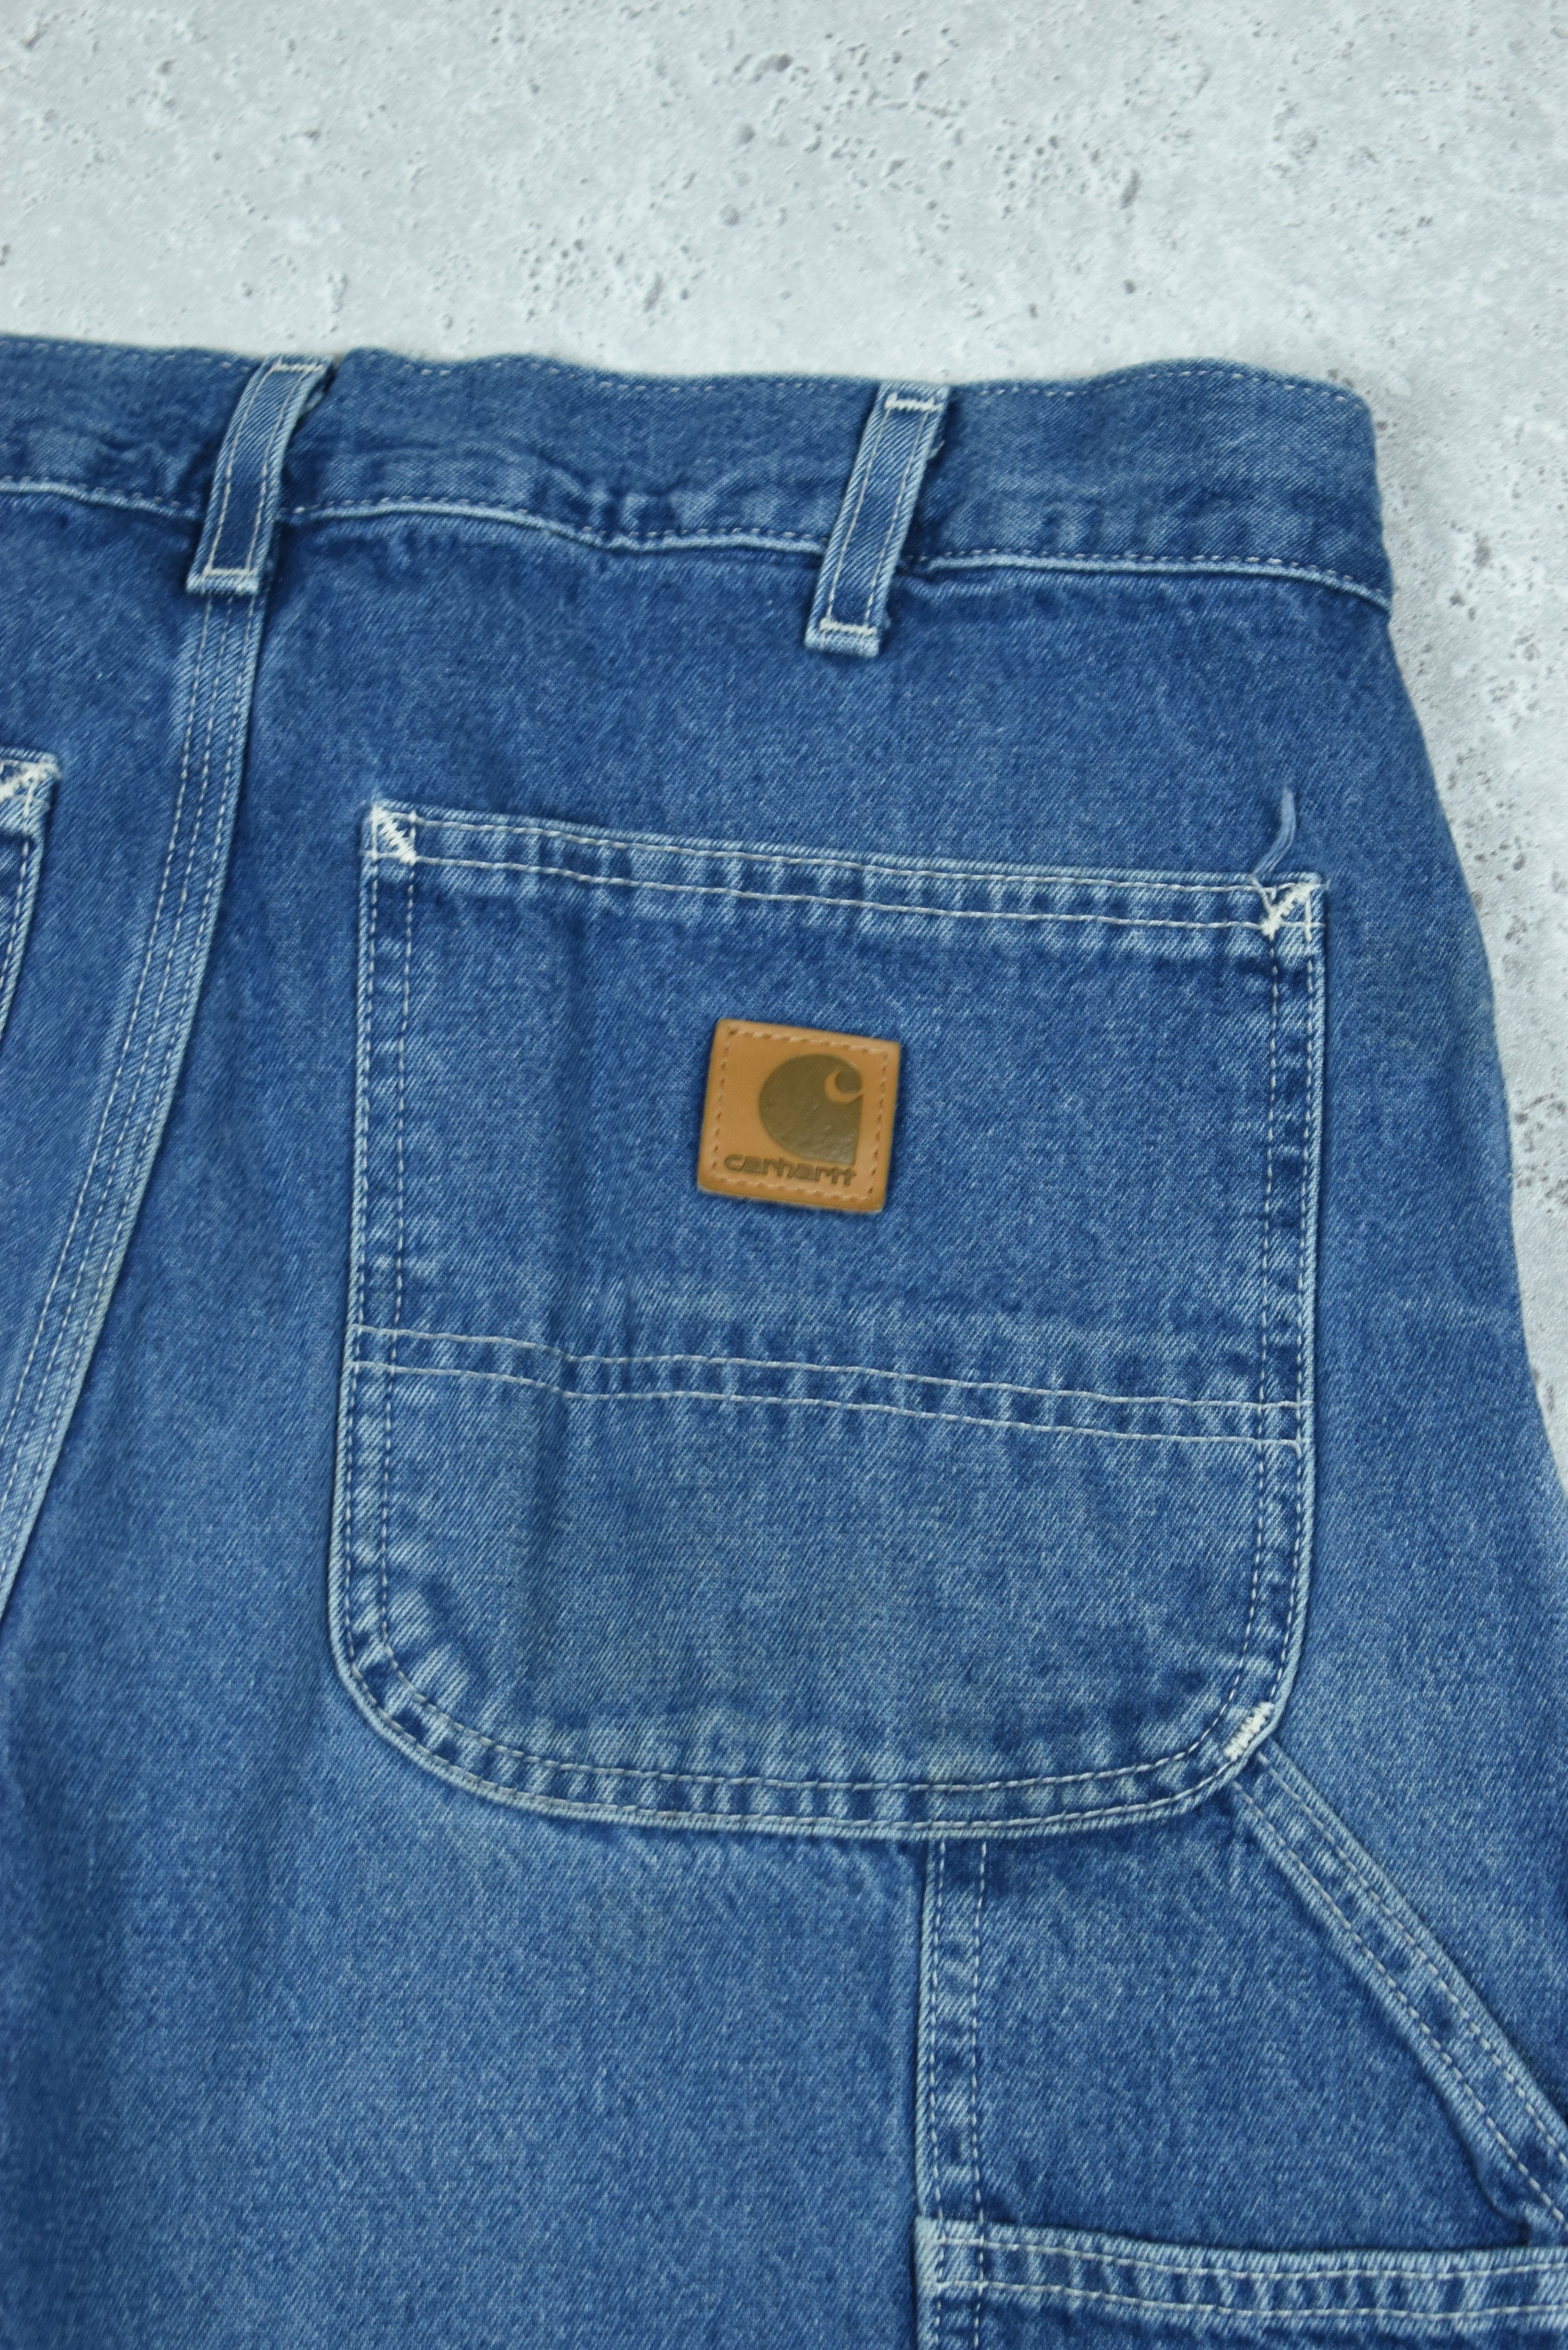 Vintage Carhartt Dungaree Fit Jeans 32x34